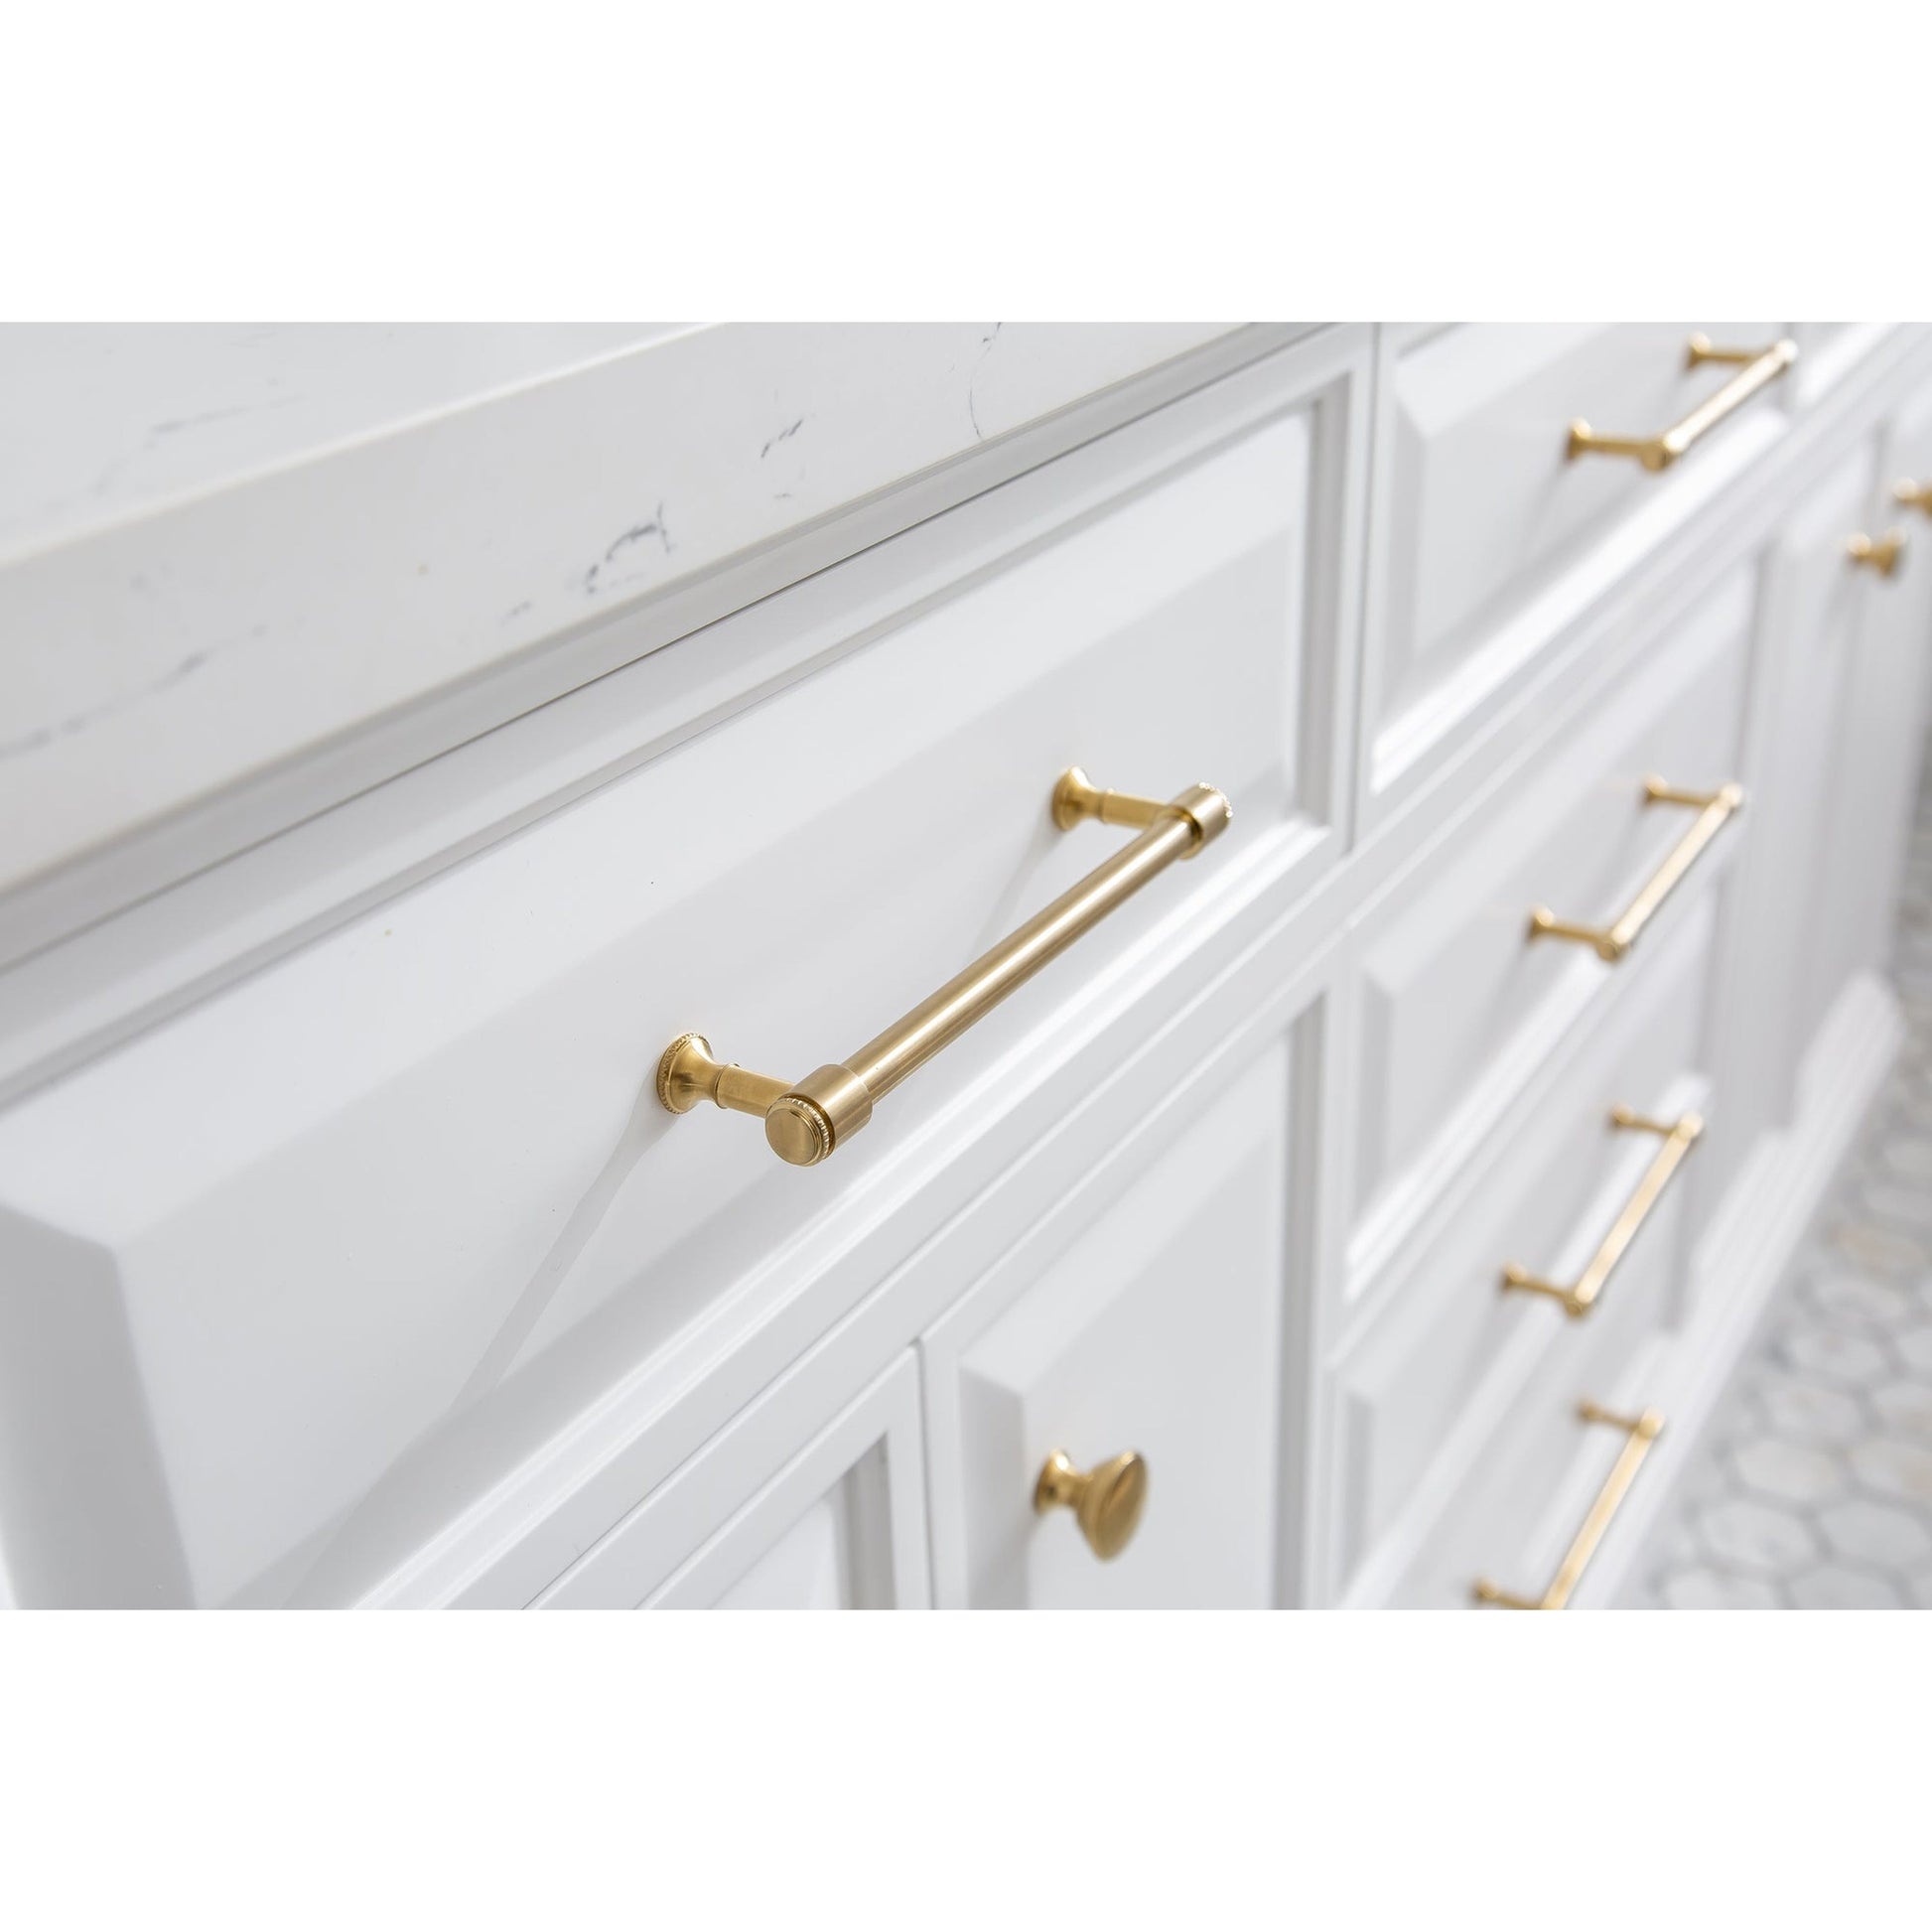 Water Creation Palace 72" Quartz Carrara Pure White Bathroom Vanity Set With Hardware And F2-0013 Faucets in Satin Gold Finish And Only Mirrors in Chrome Finish